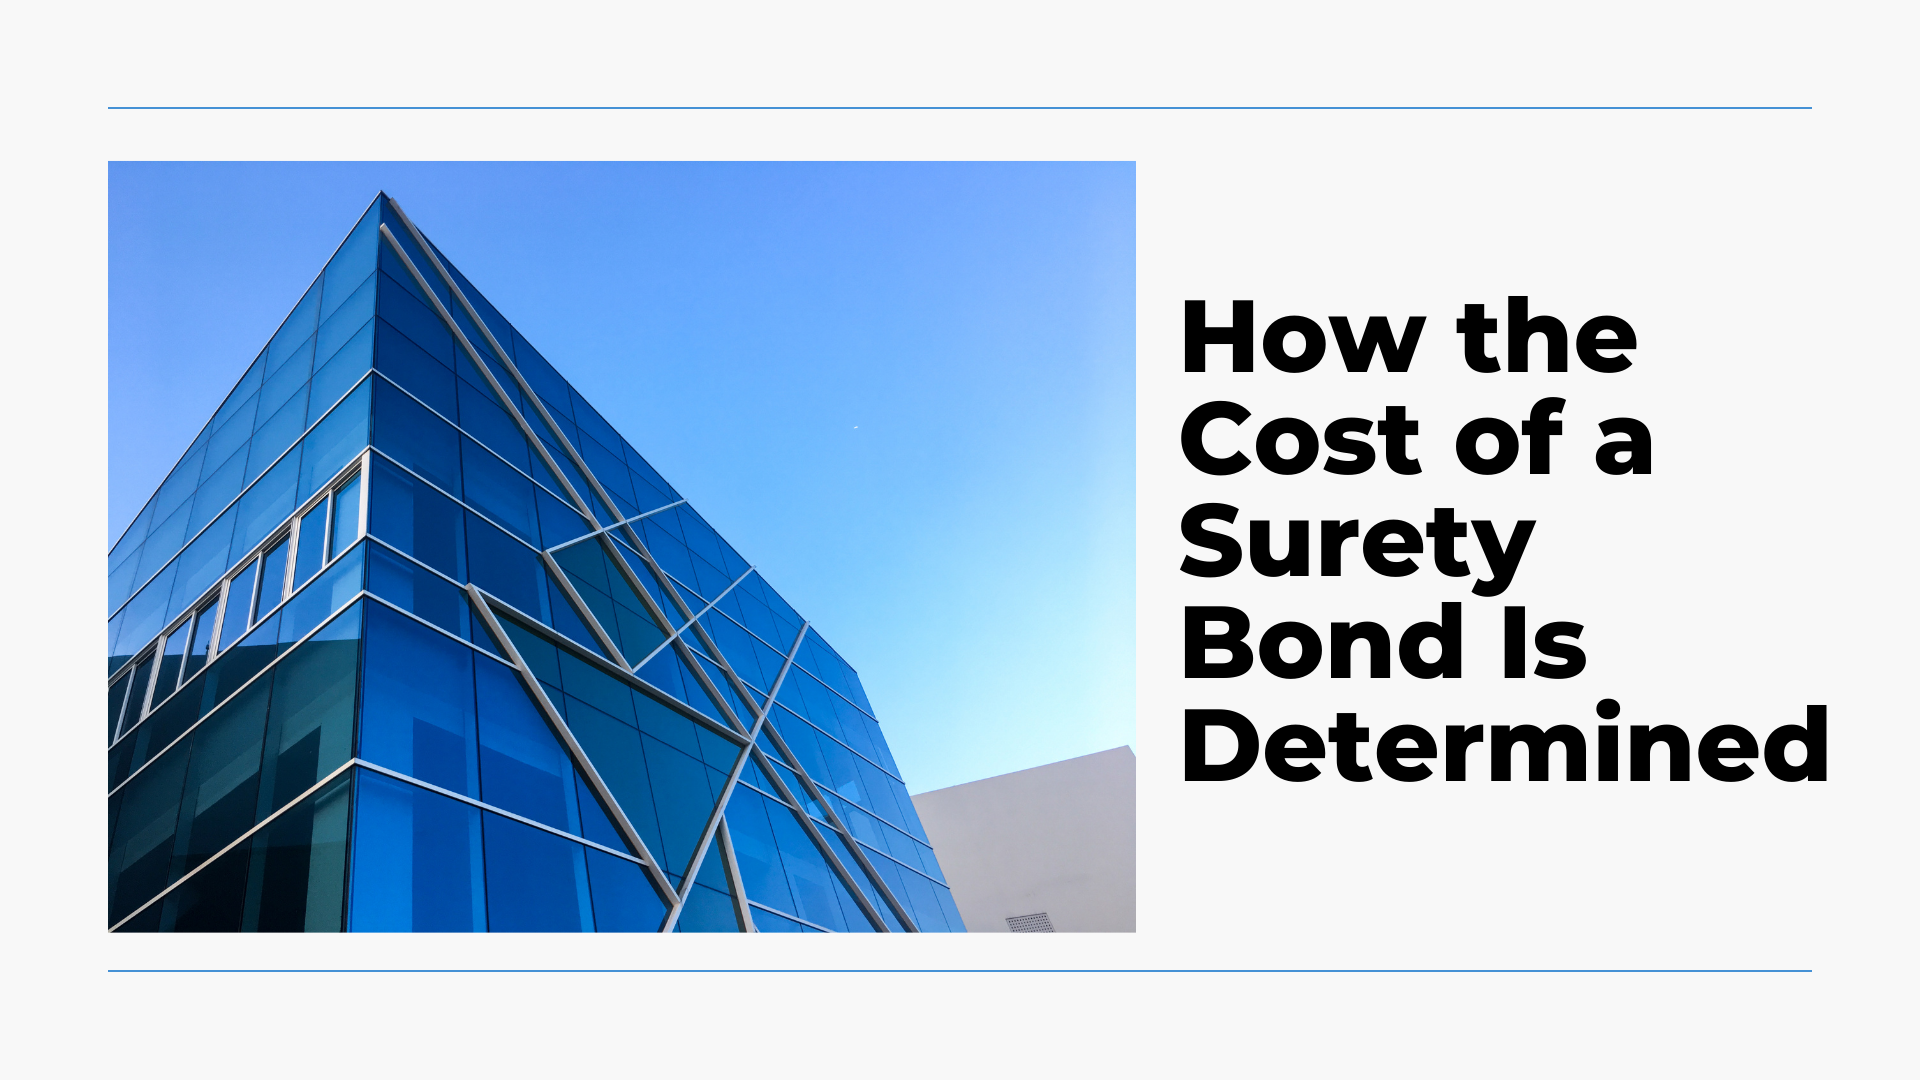 surety bonds - How much does a surety bond cost - exterior of a building made of glass